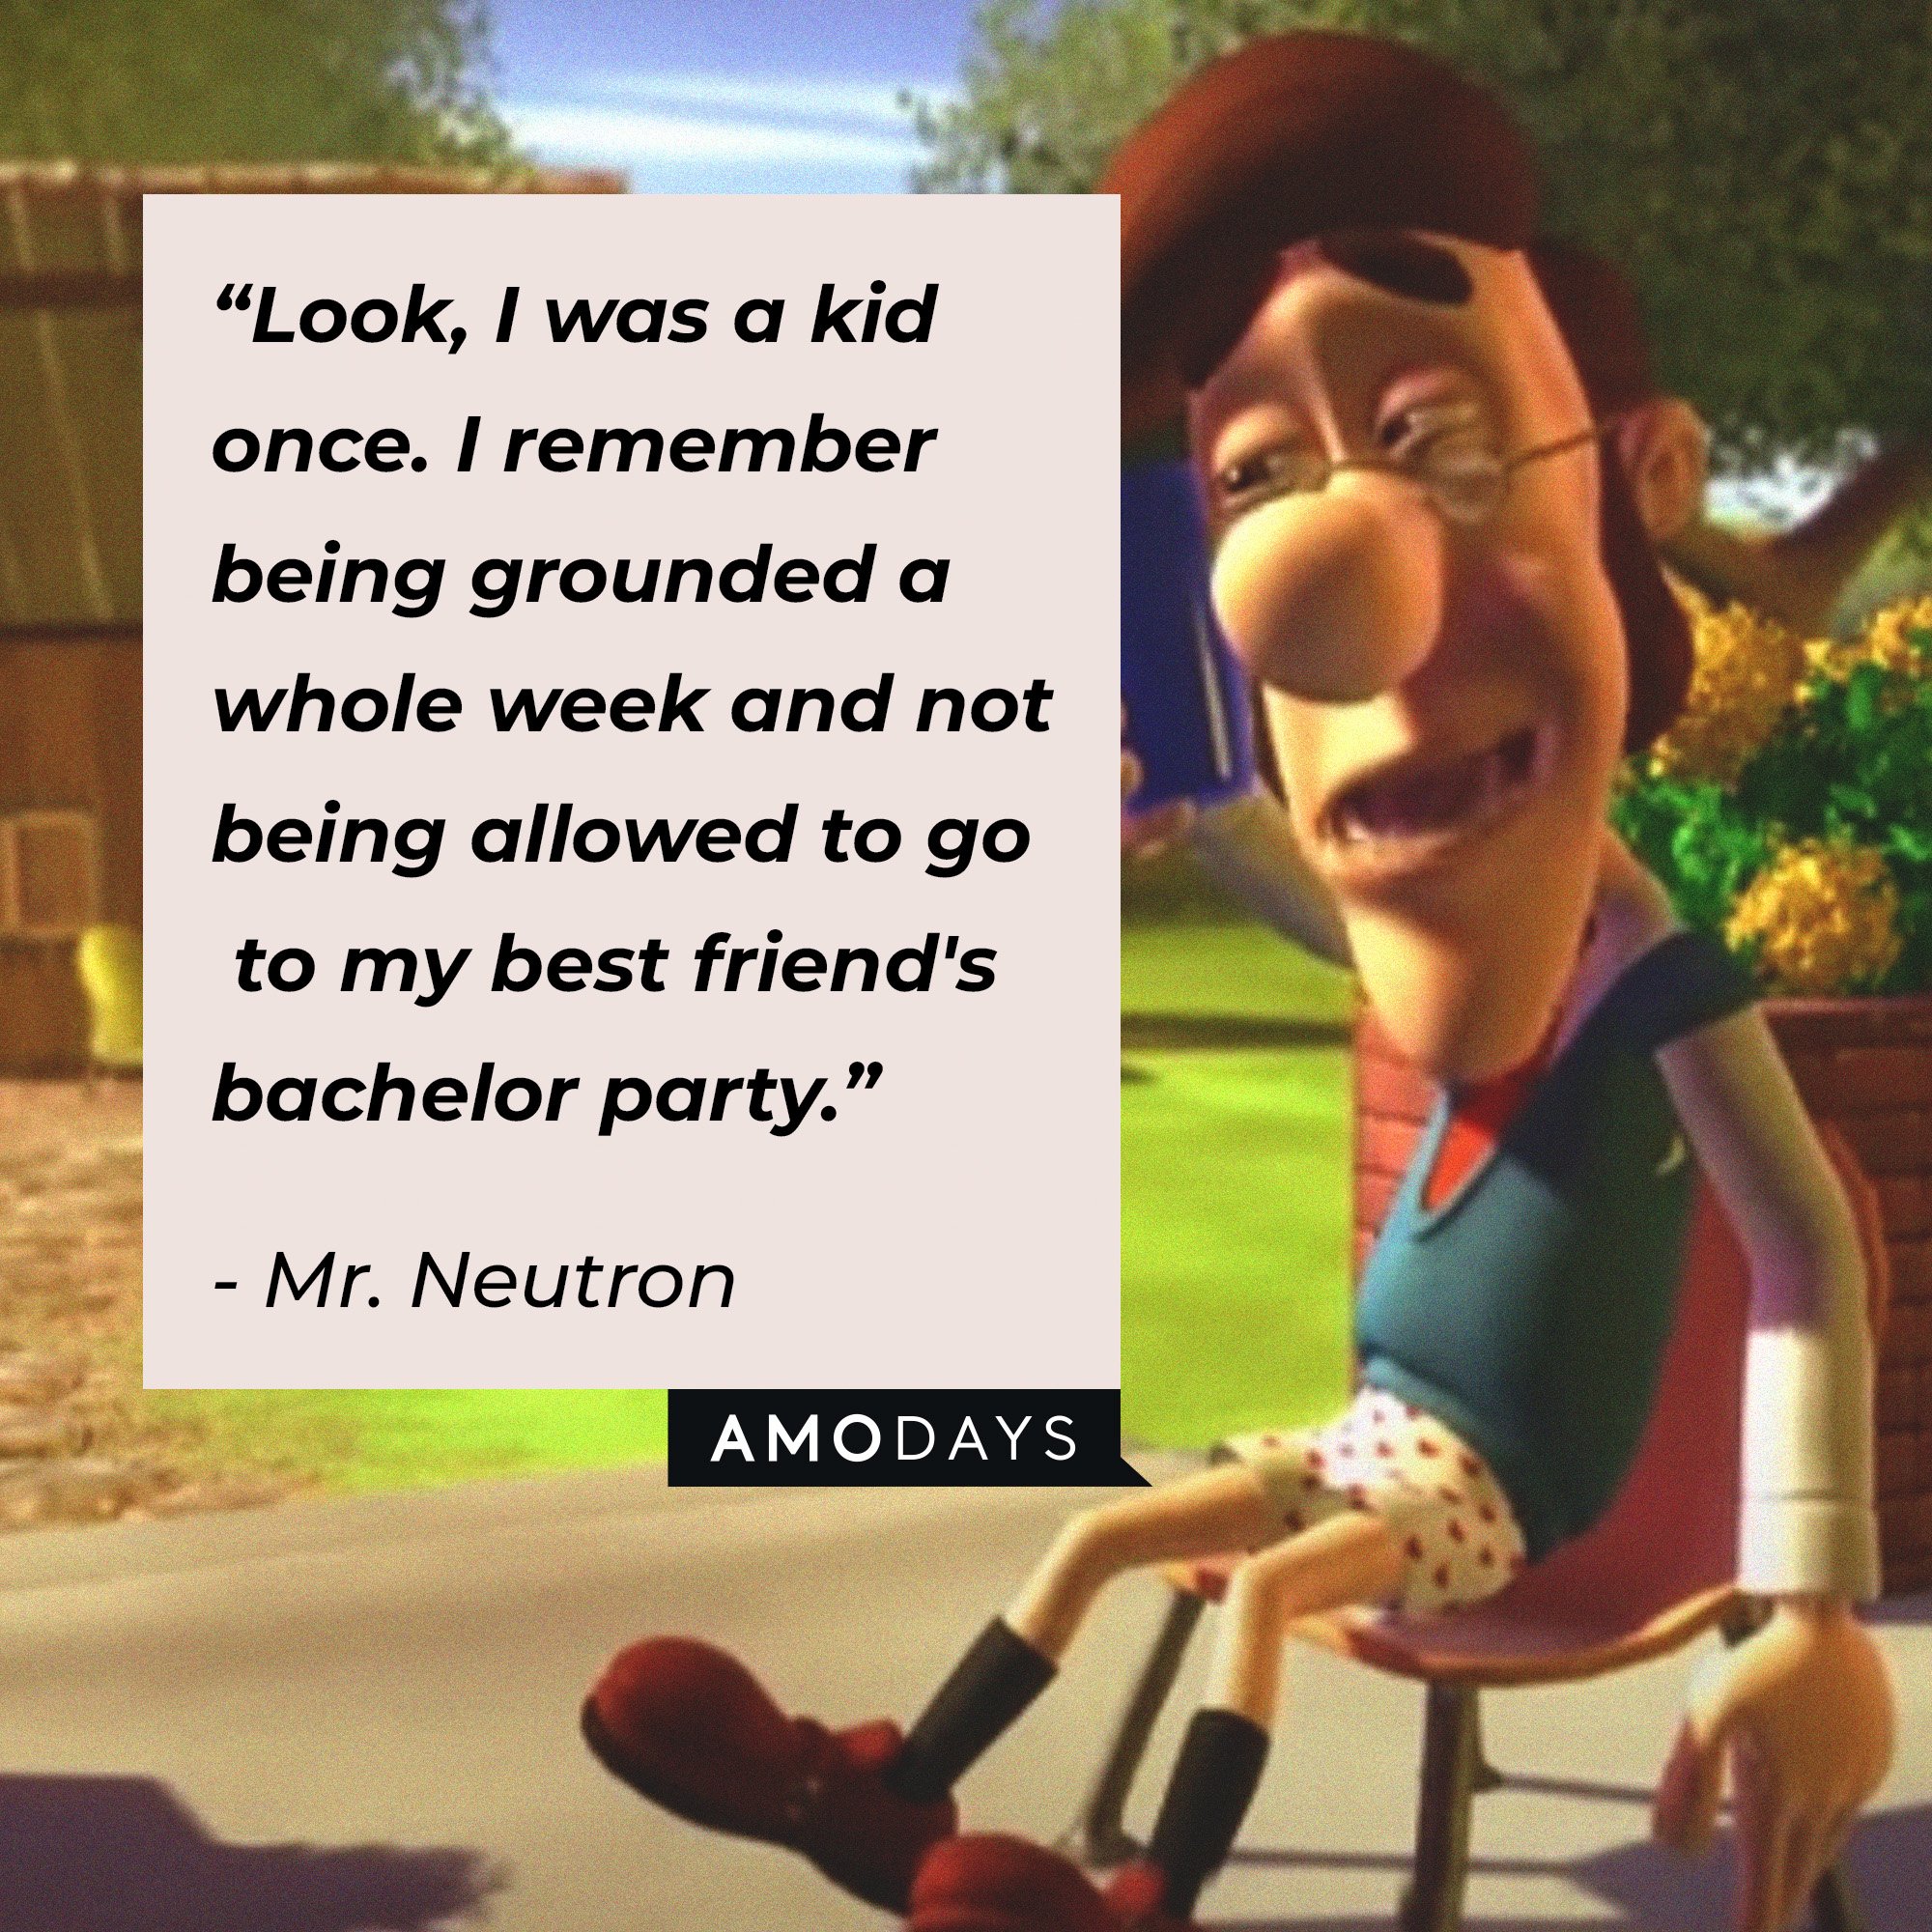 Mr. Neutron’s quote: “Look, I was a kid once. I remember being grounded a whole week and not being allowed to go to my best friend's bachelor party.” | Image: AmoDays